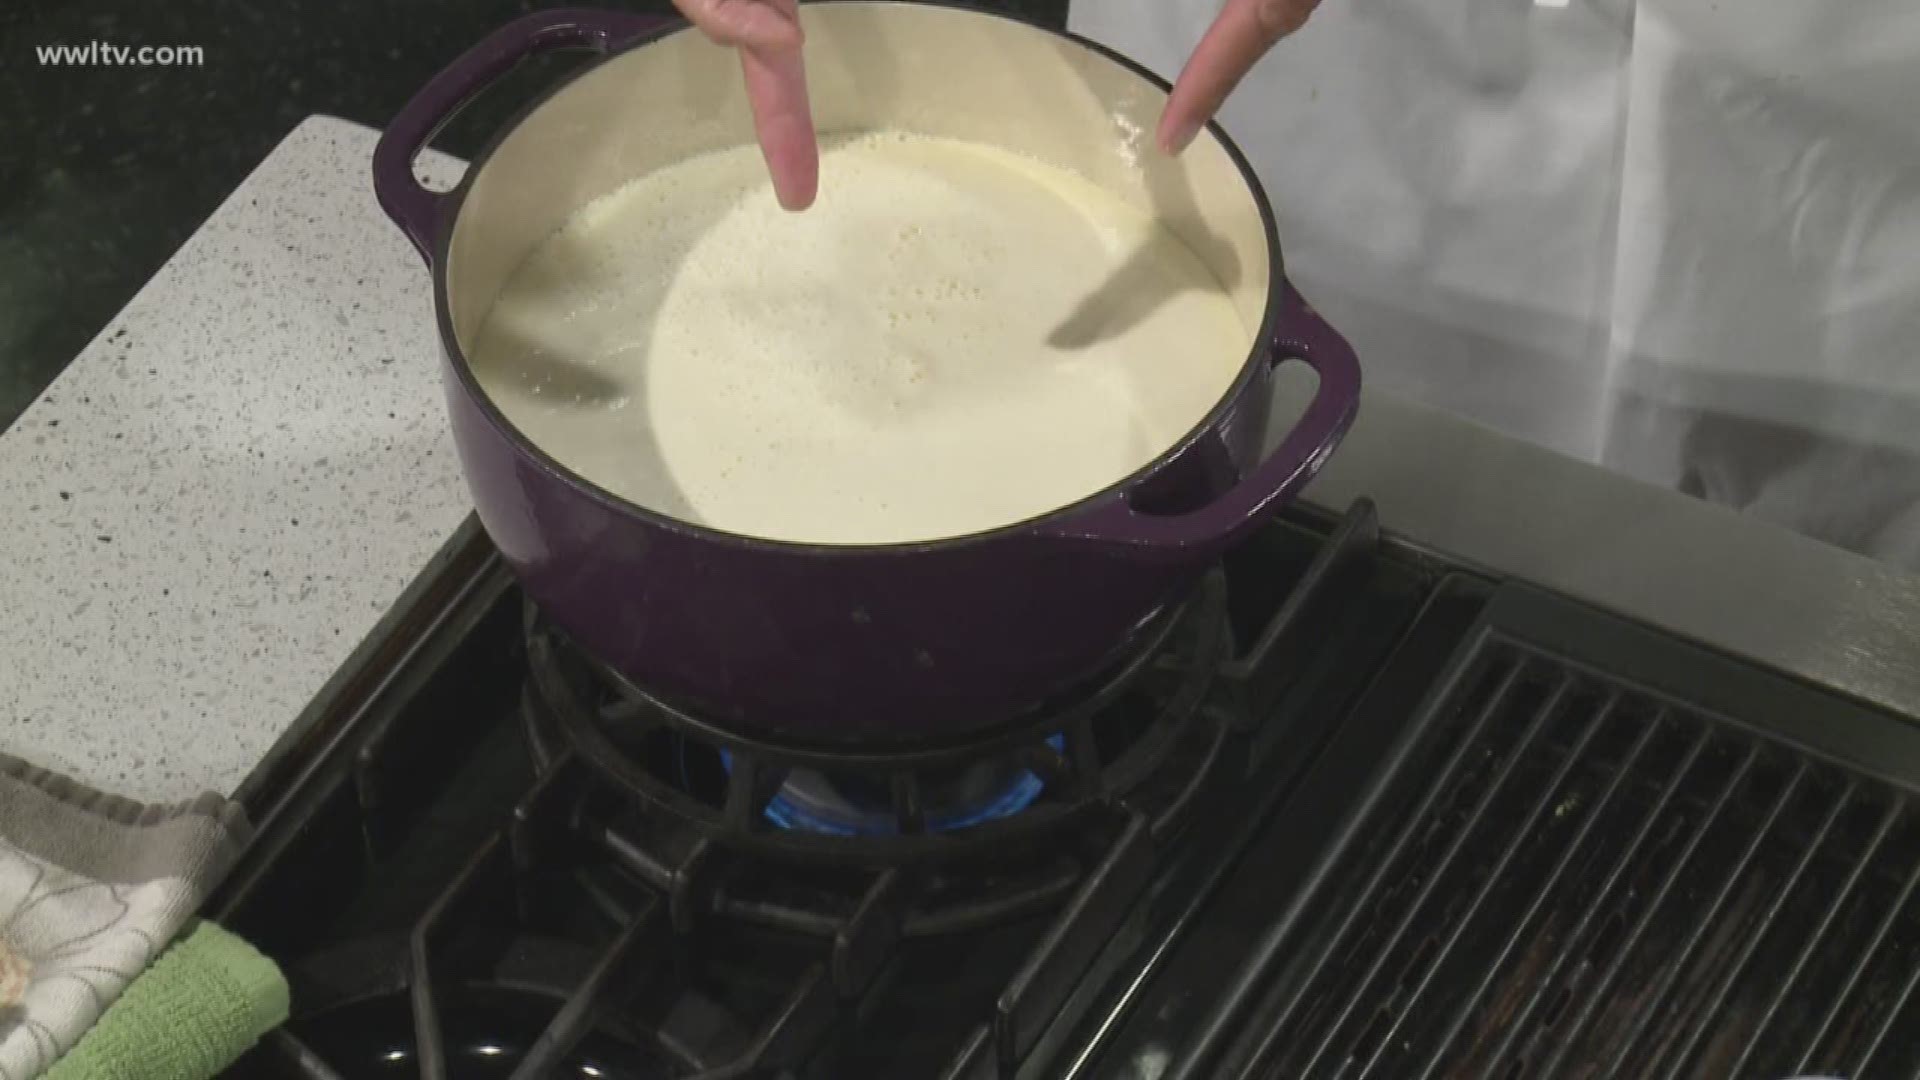 Chef Kevin Belton is in the kitchen whipping up some eggnog muffins.